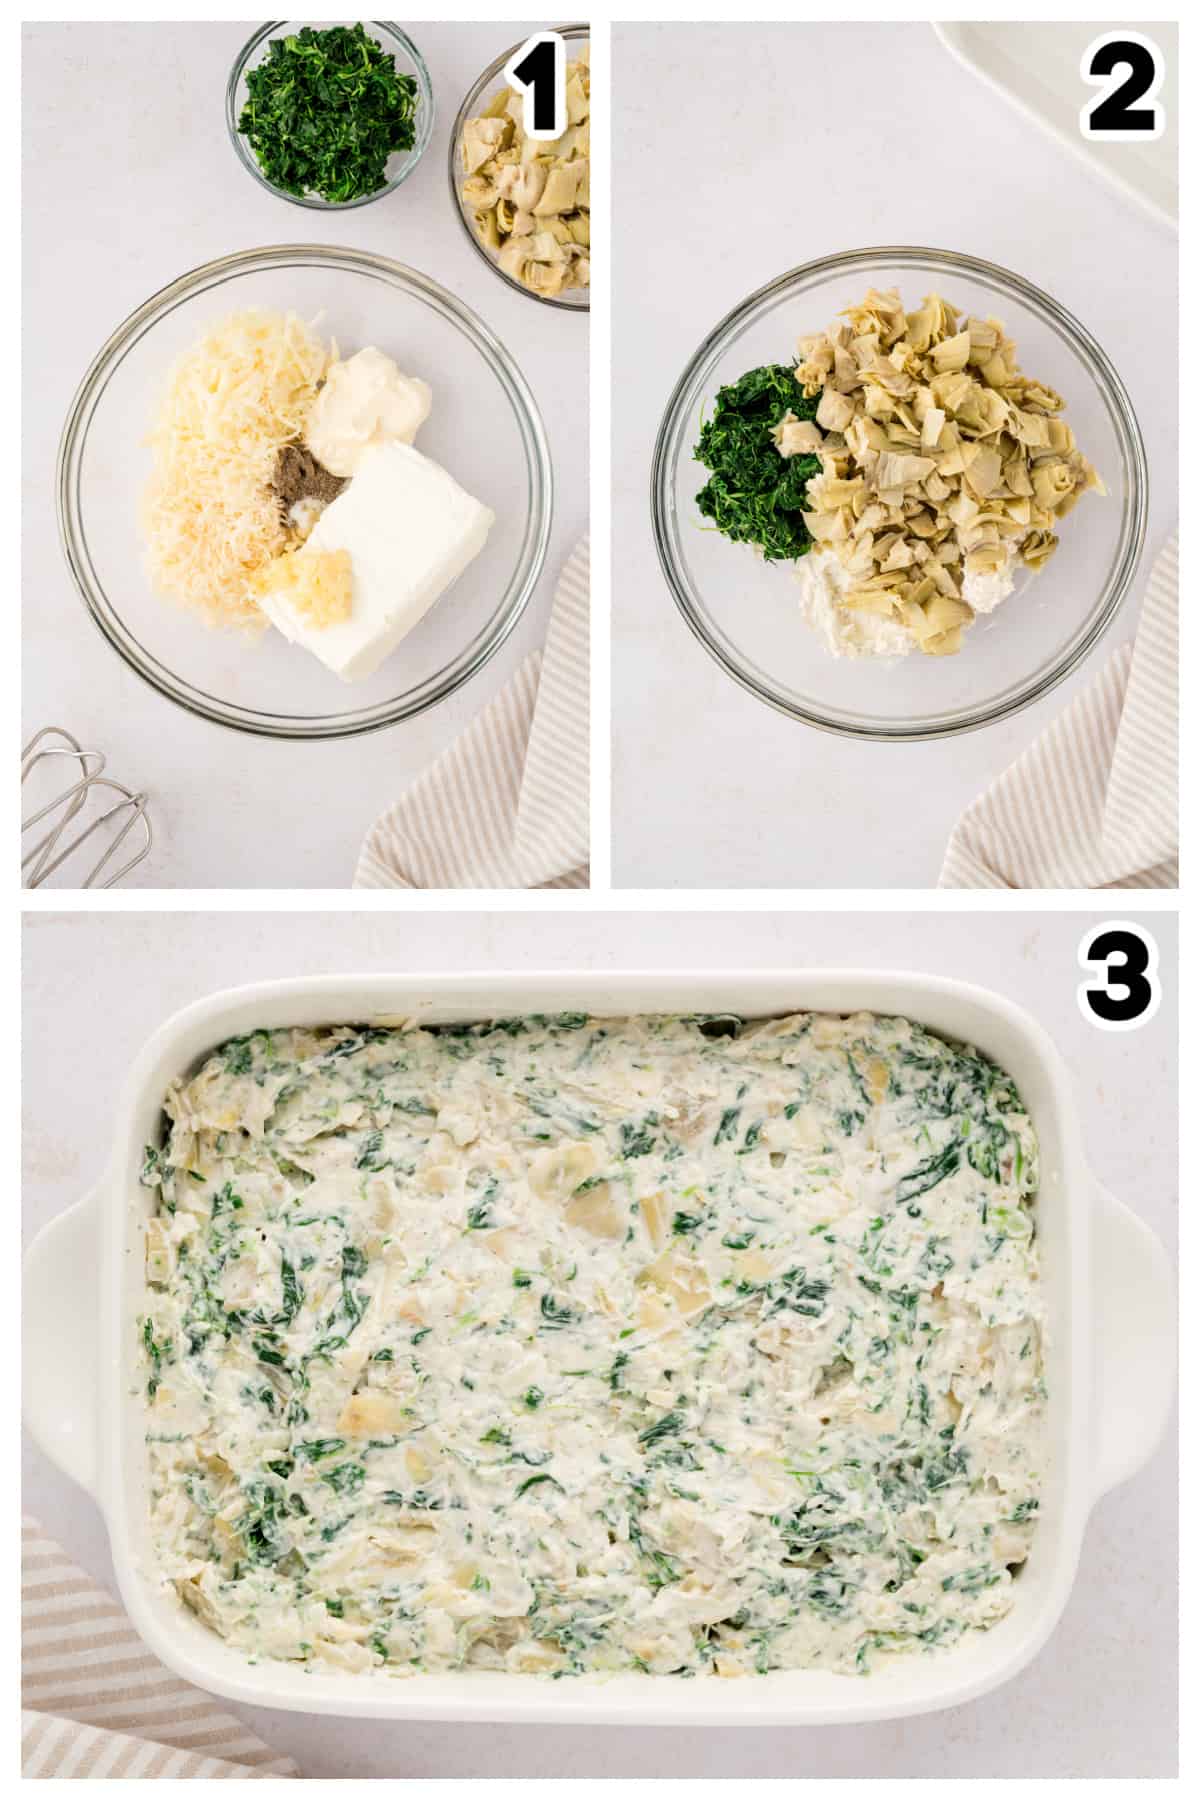 Collage showing how to make spinach artichoke dip.